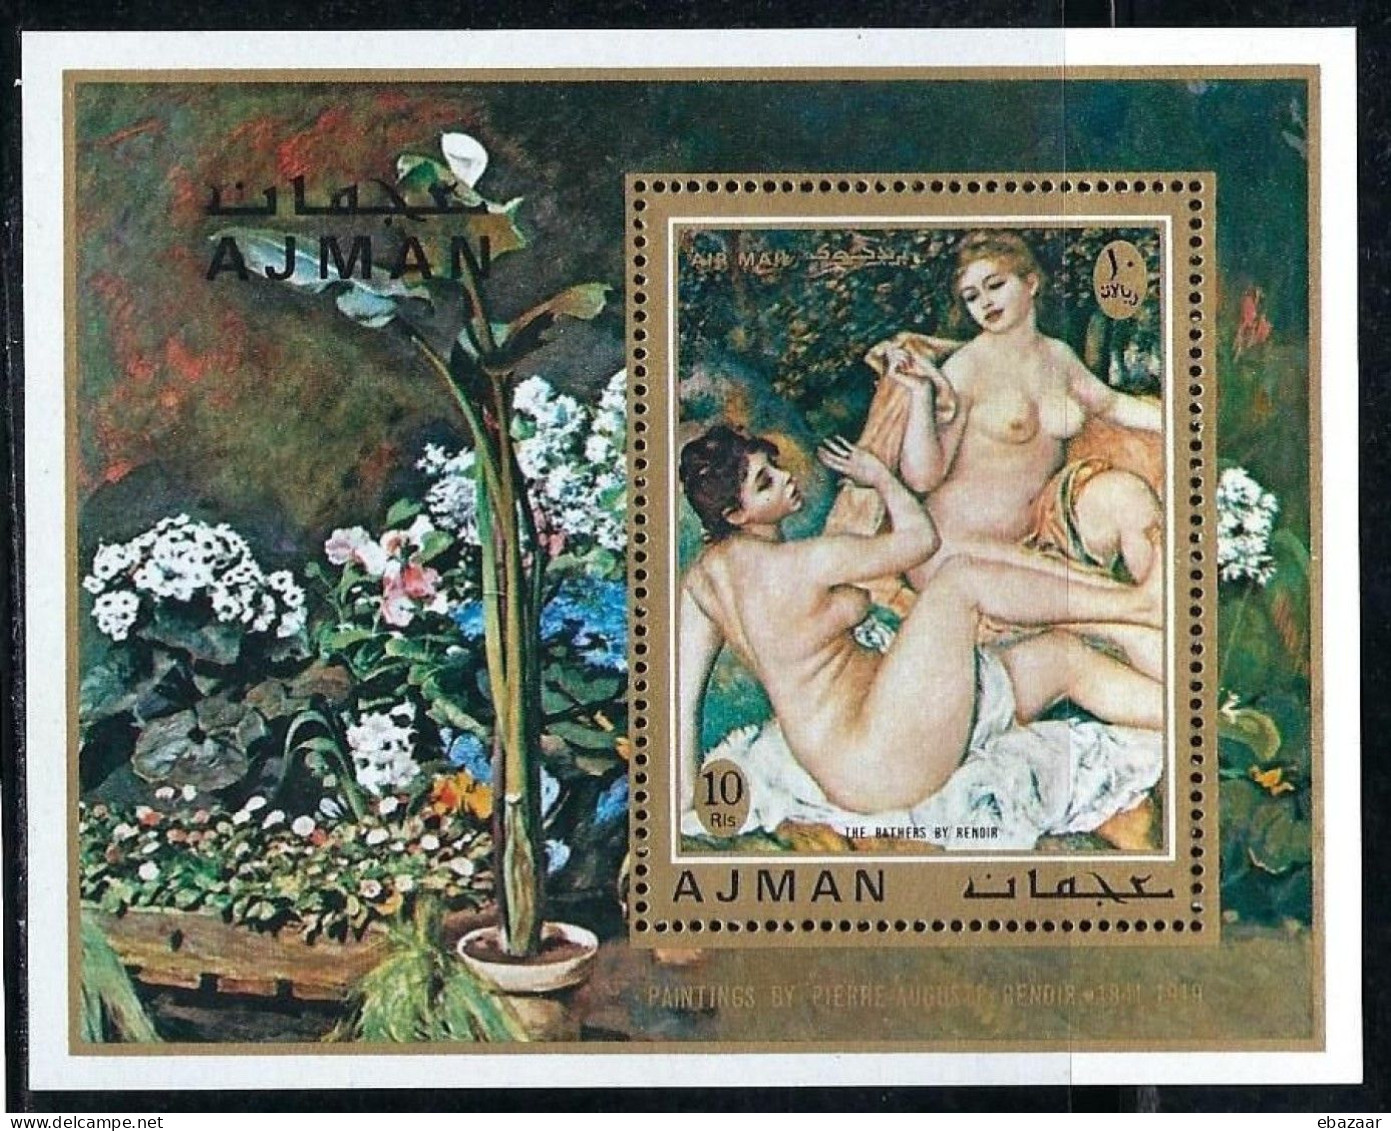 Ajman 1971 Airmail - French Impressionist Auguste Renoir - Nude Paintings Stamps MNH - Ajman